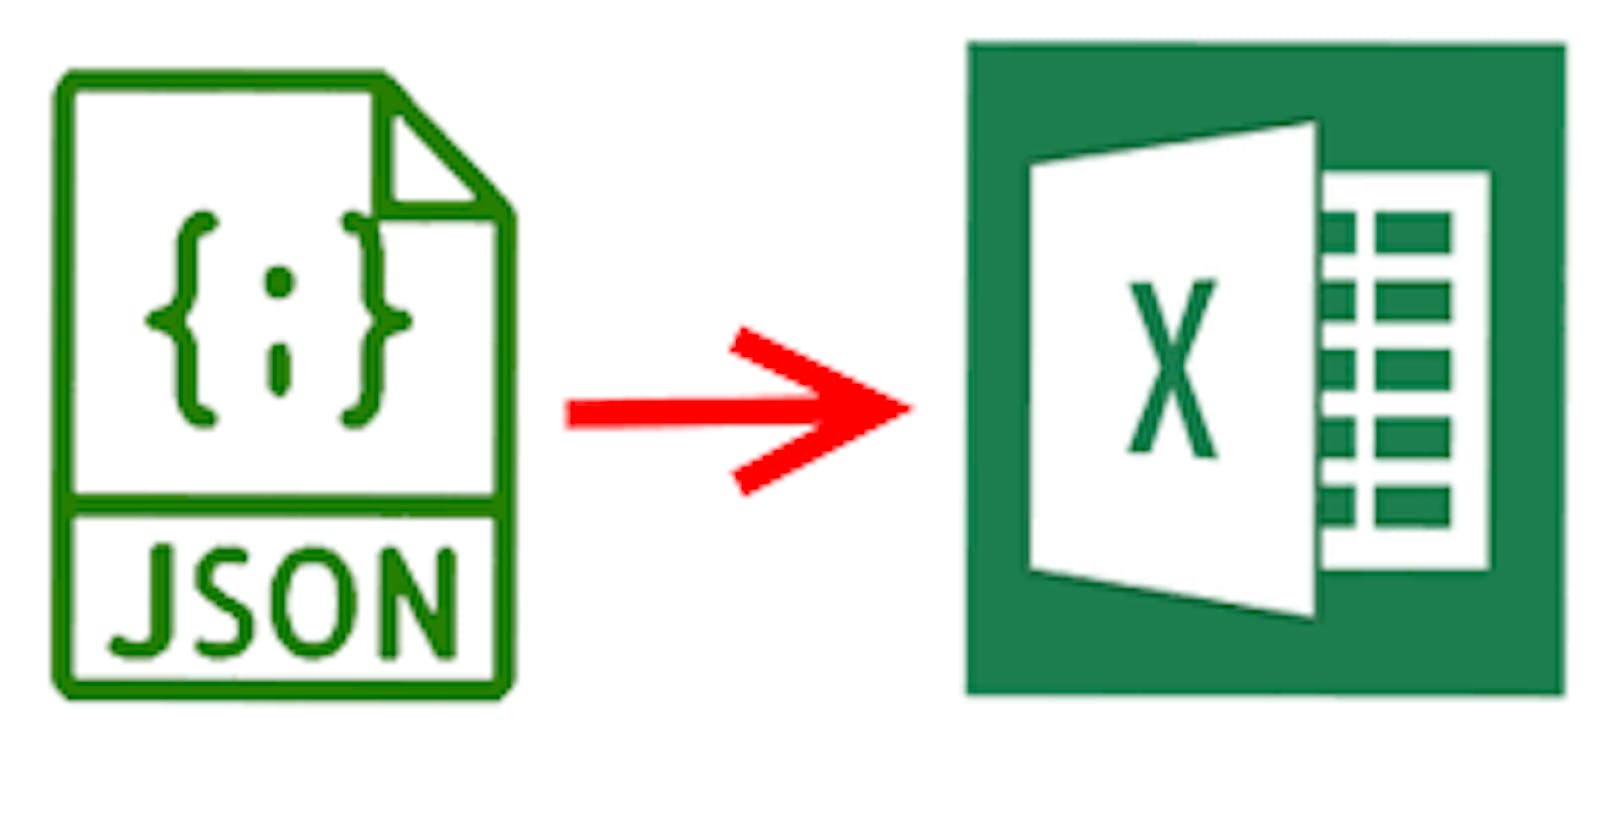 Exporting Data to Excel in React Using xlsx: A Step-by-Step Guide